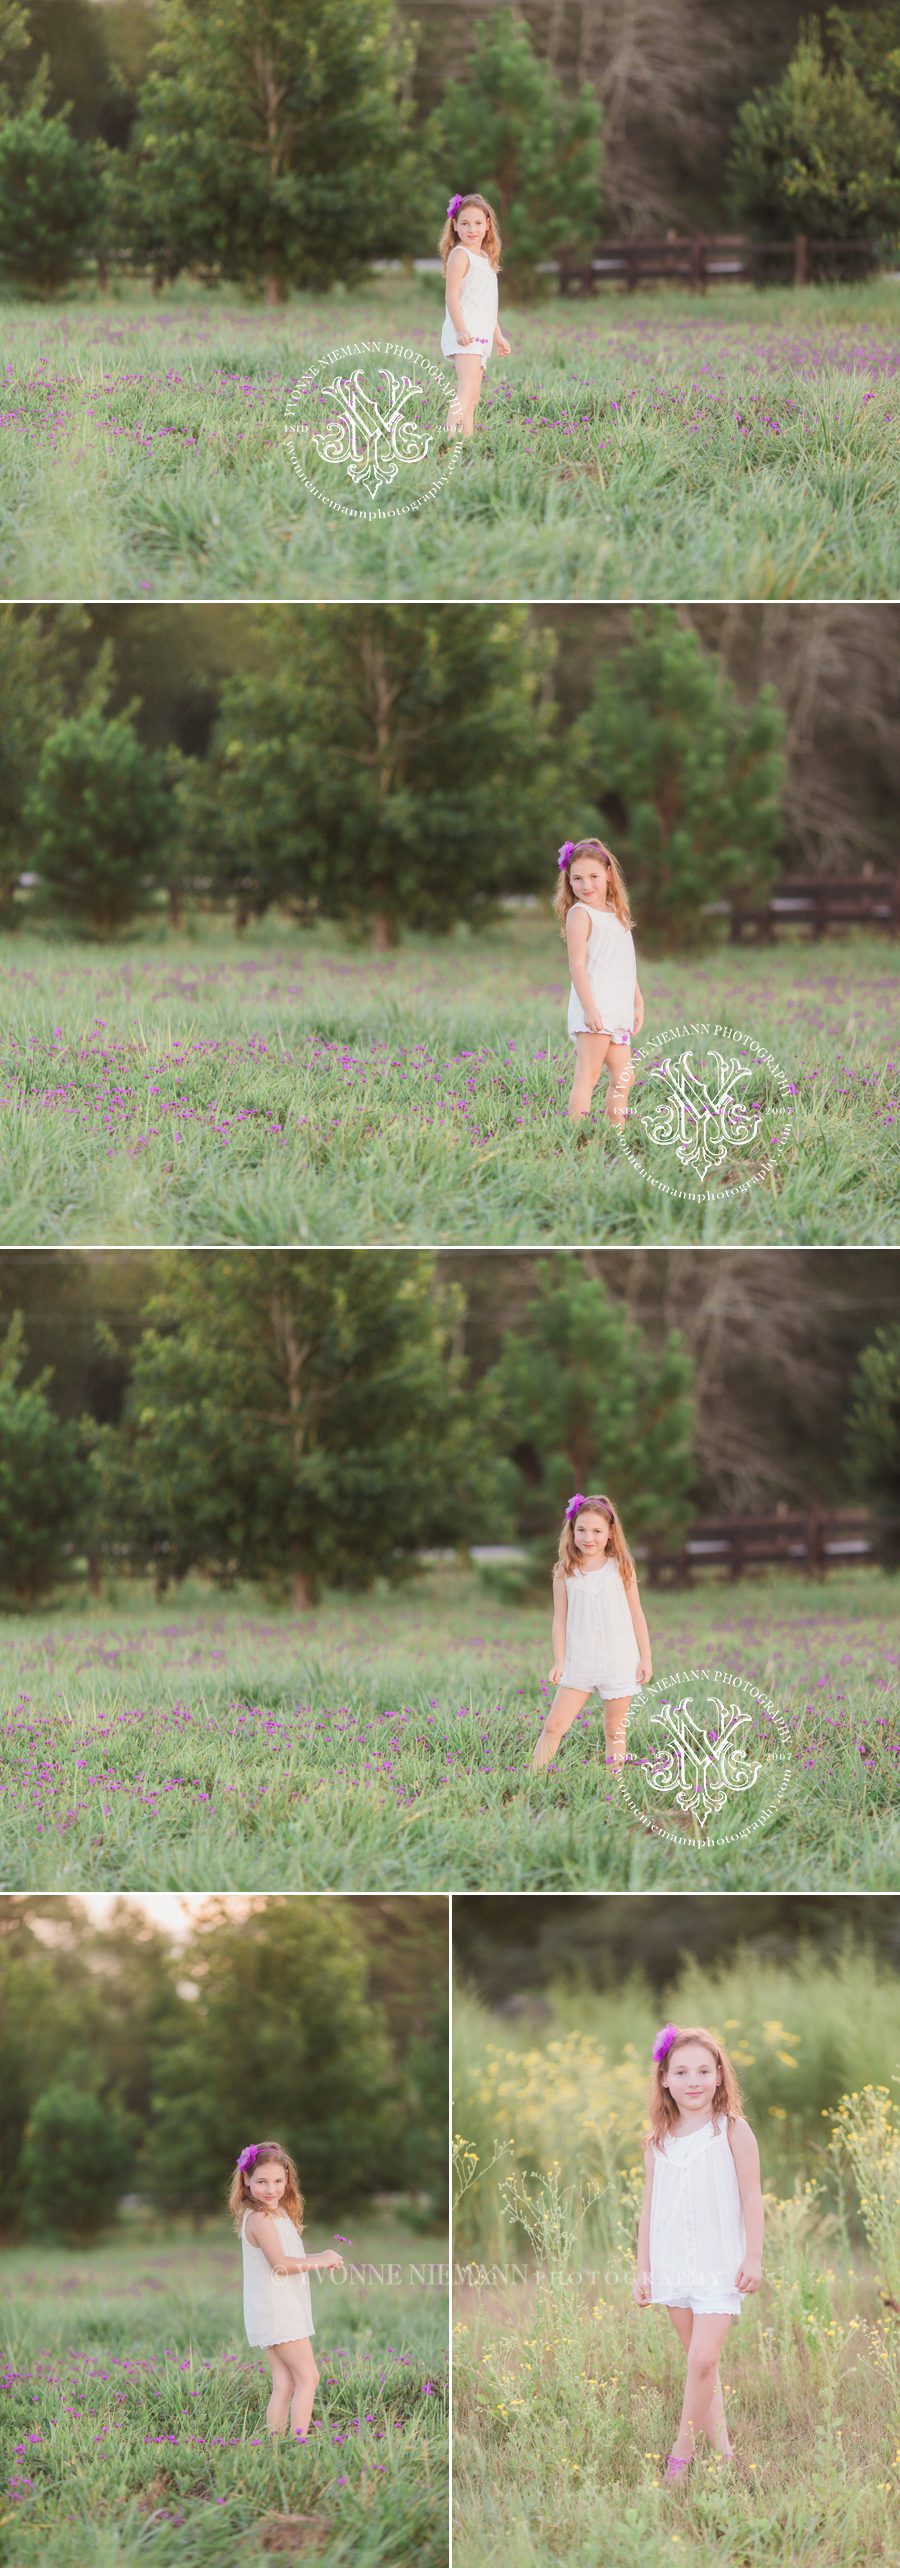 Authentic photos of a 2nd grader in a field of purple flowers in Oconee County, GA taken by Yvonne Niemann Photography.